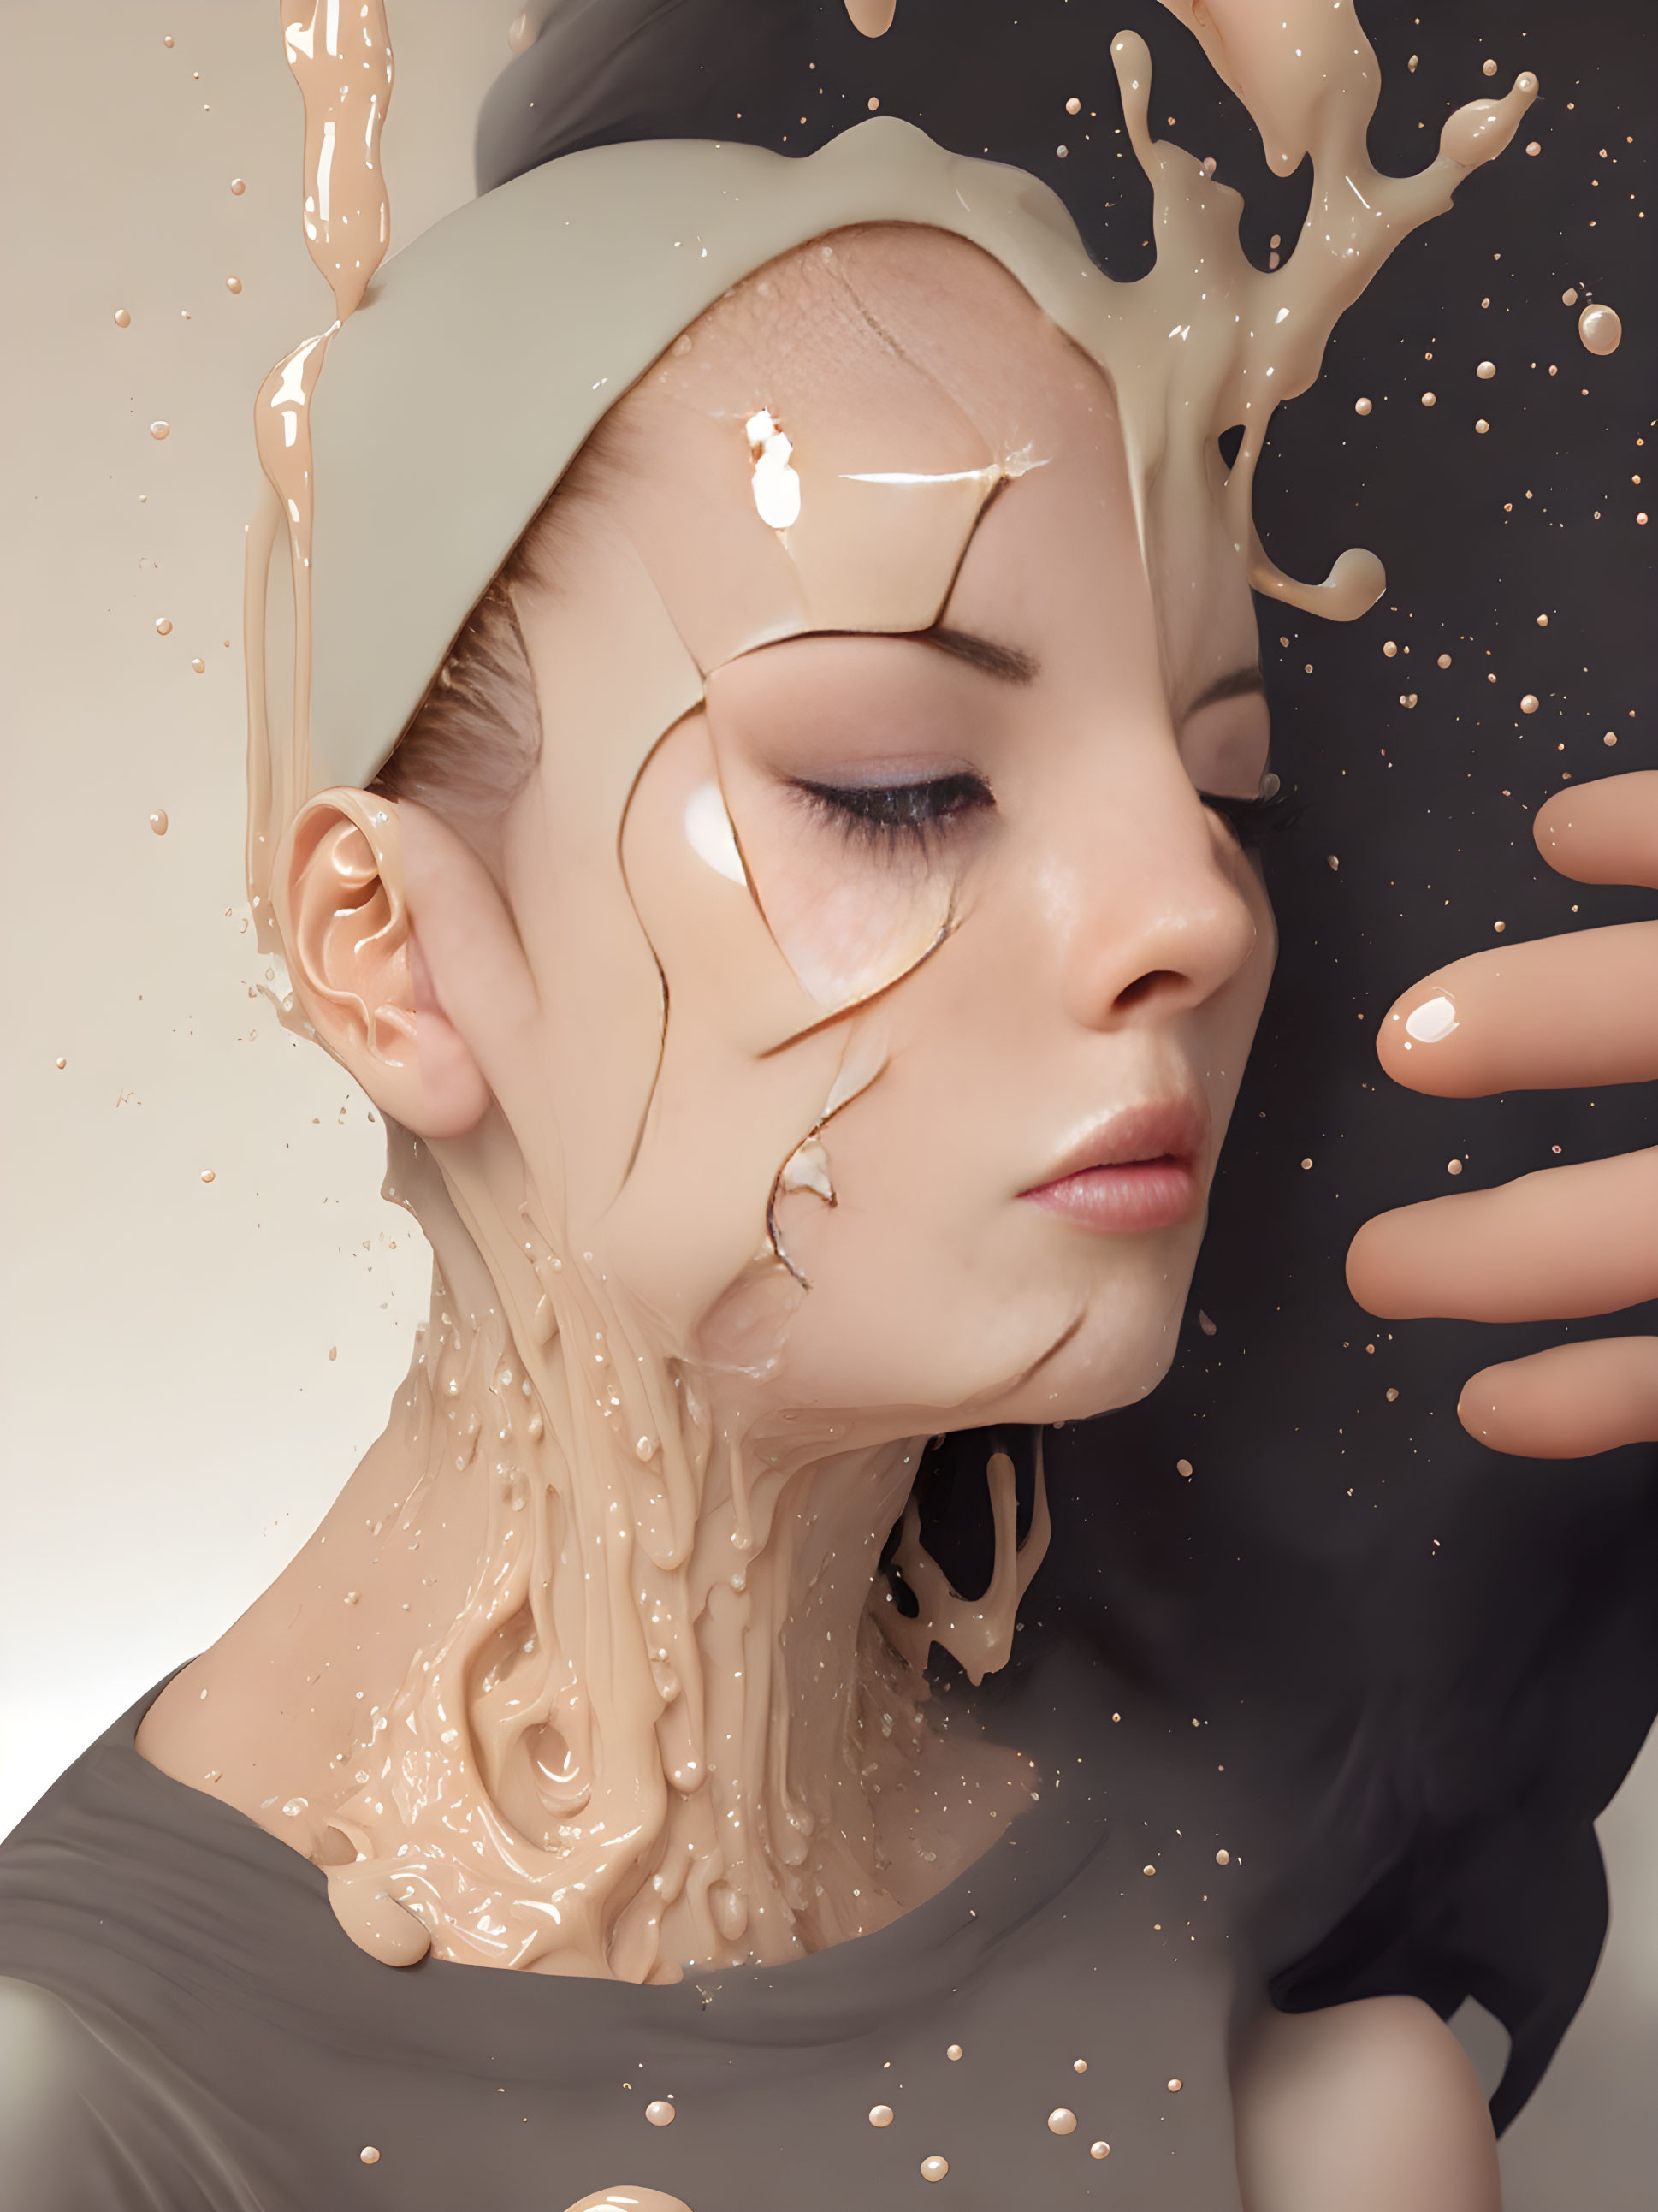 Serene woman with liquid texture covering face in blended tones